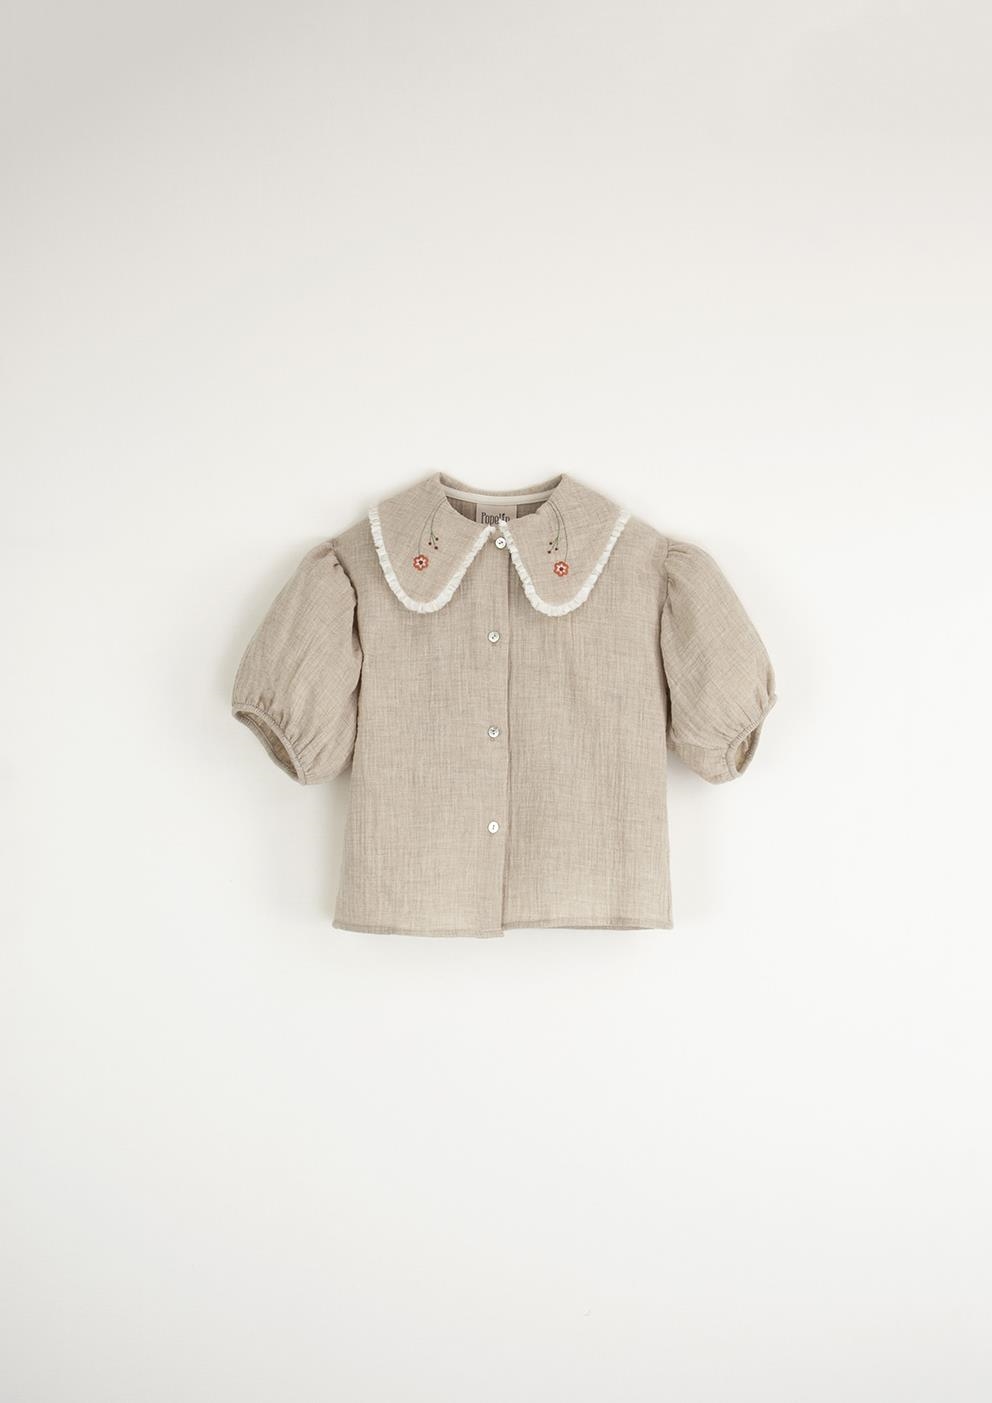 Mod.21.2 Sand organic blouse with embroidered collar | SS23 Mod.21.2 Sand organic blouse with embroidered collar